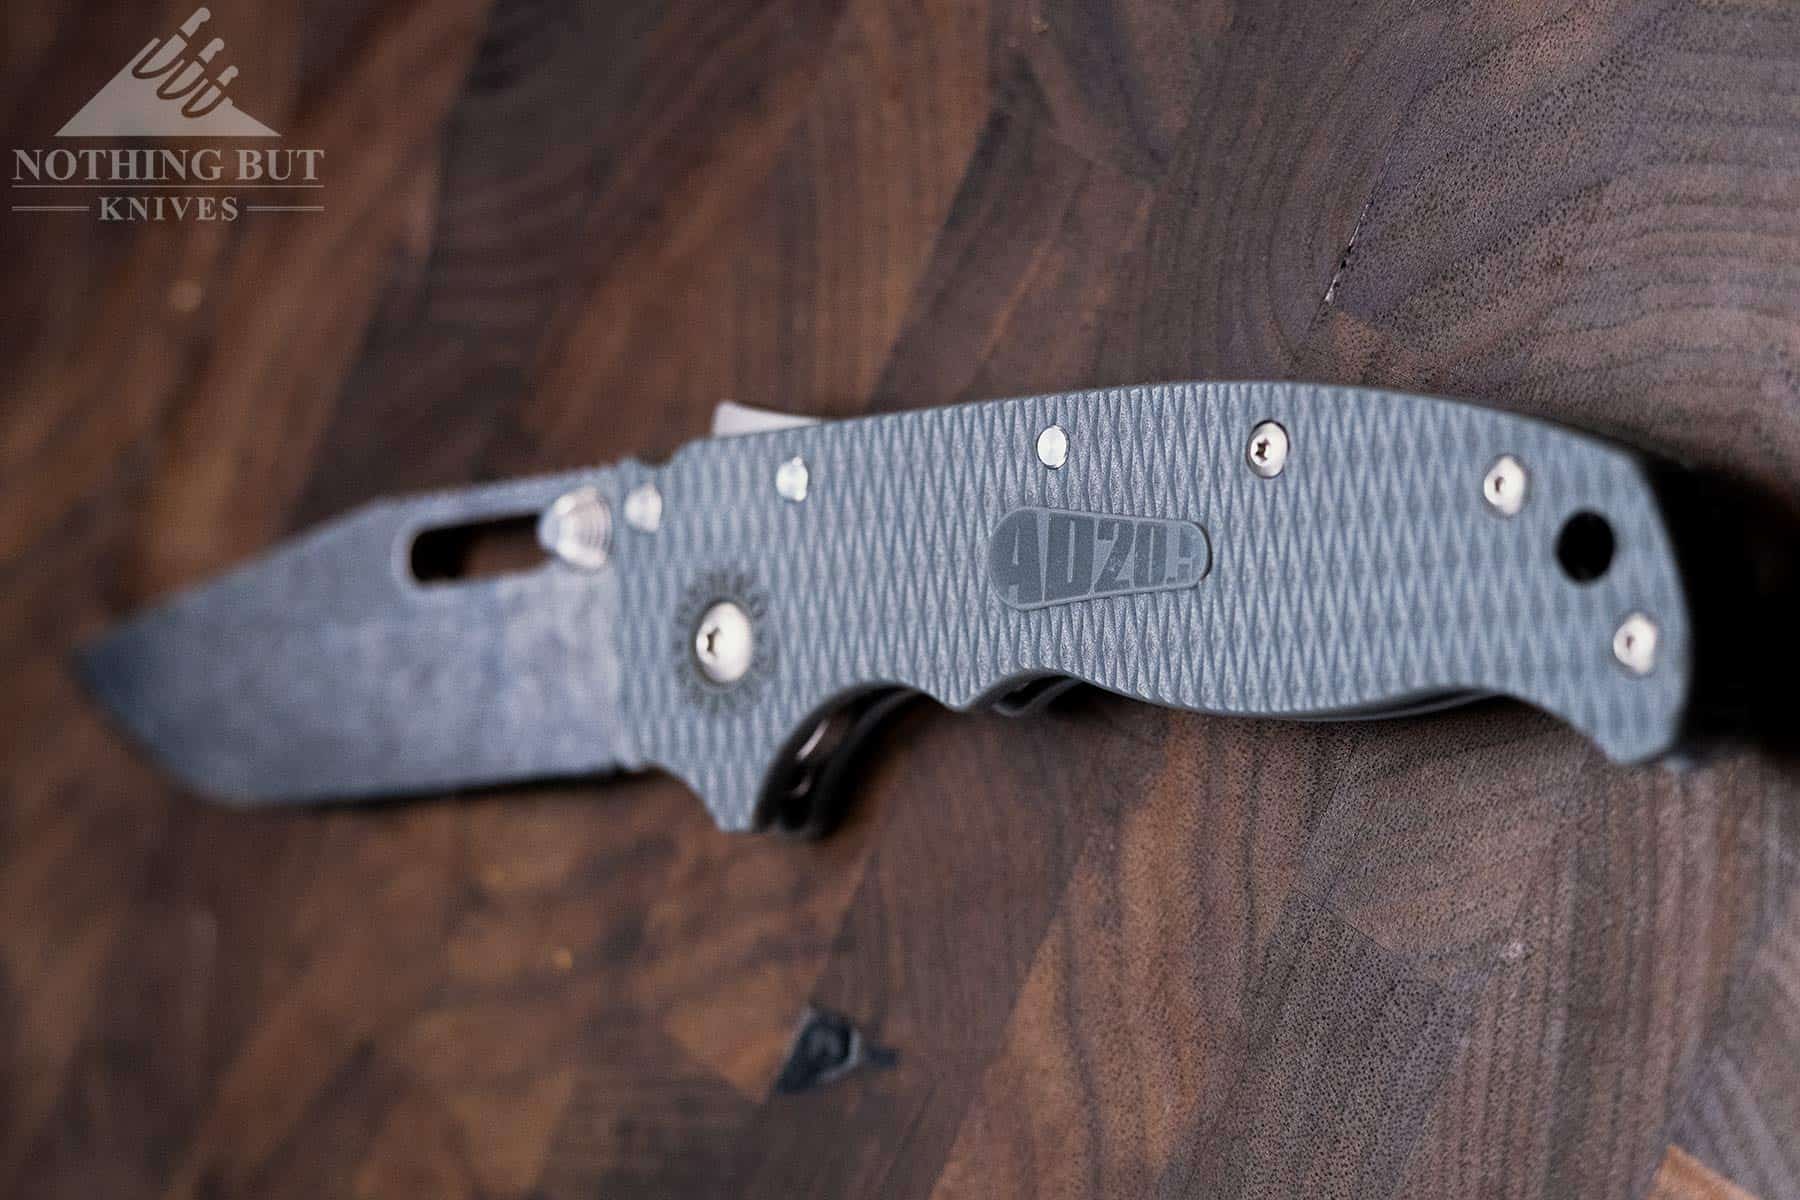 A close-up of the Demko AD 20.5 handle scales that shows the texturing.